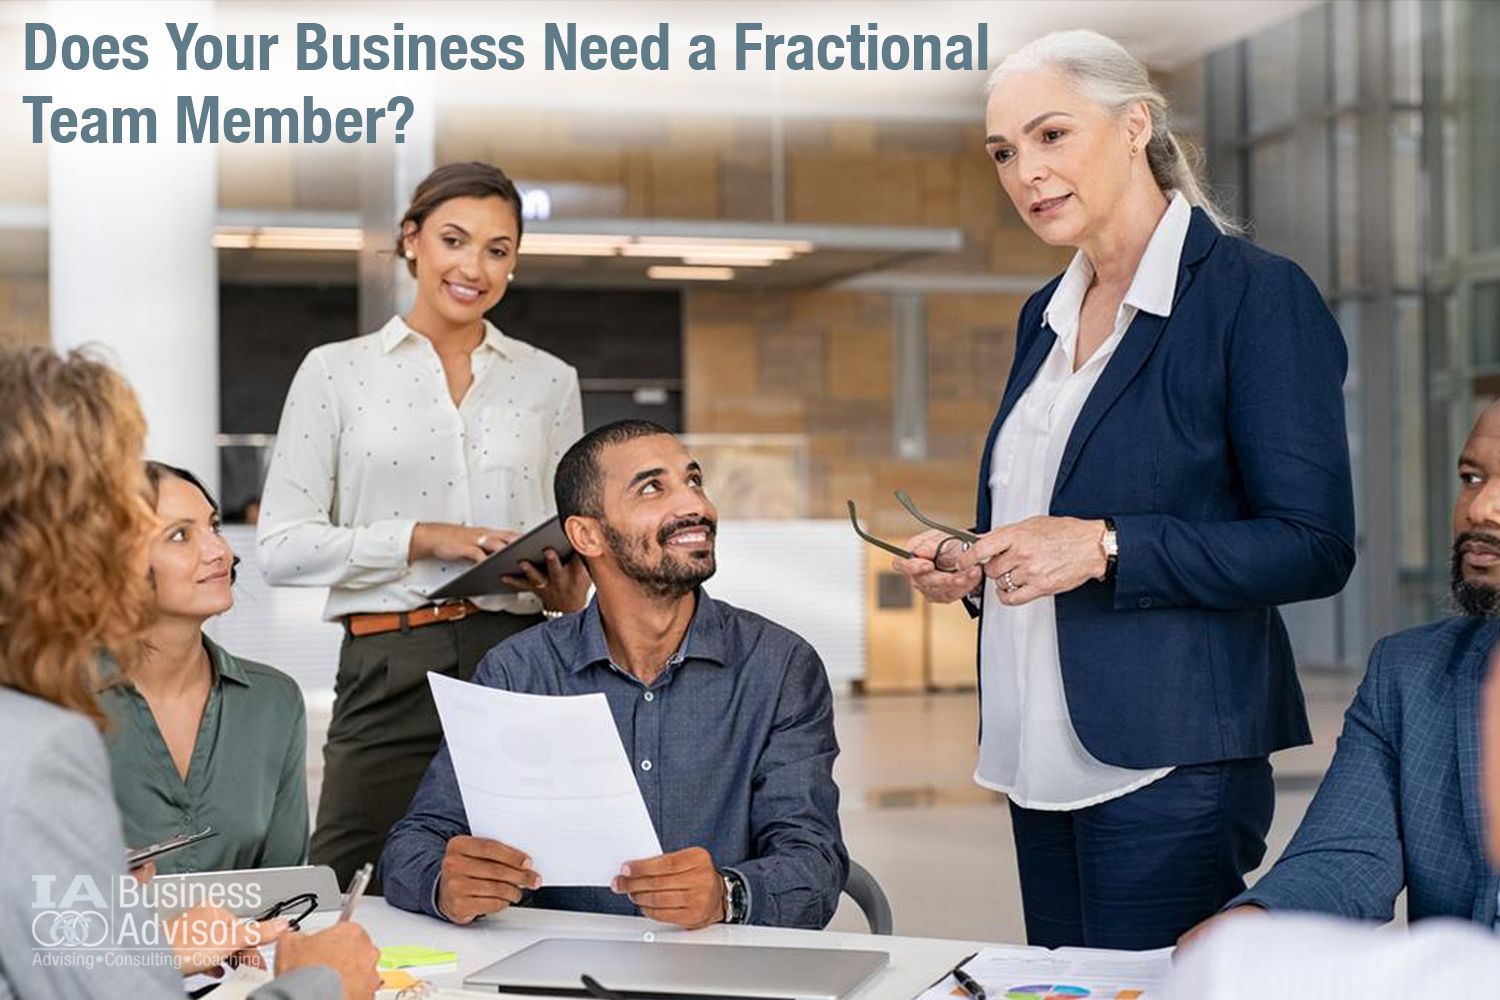 Does Your Business Need a Fractional Team Member?